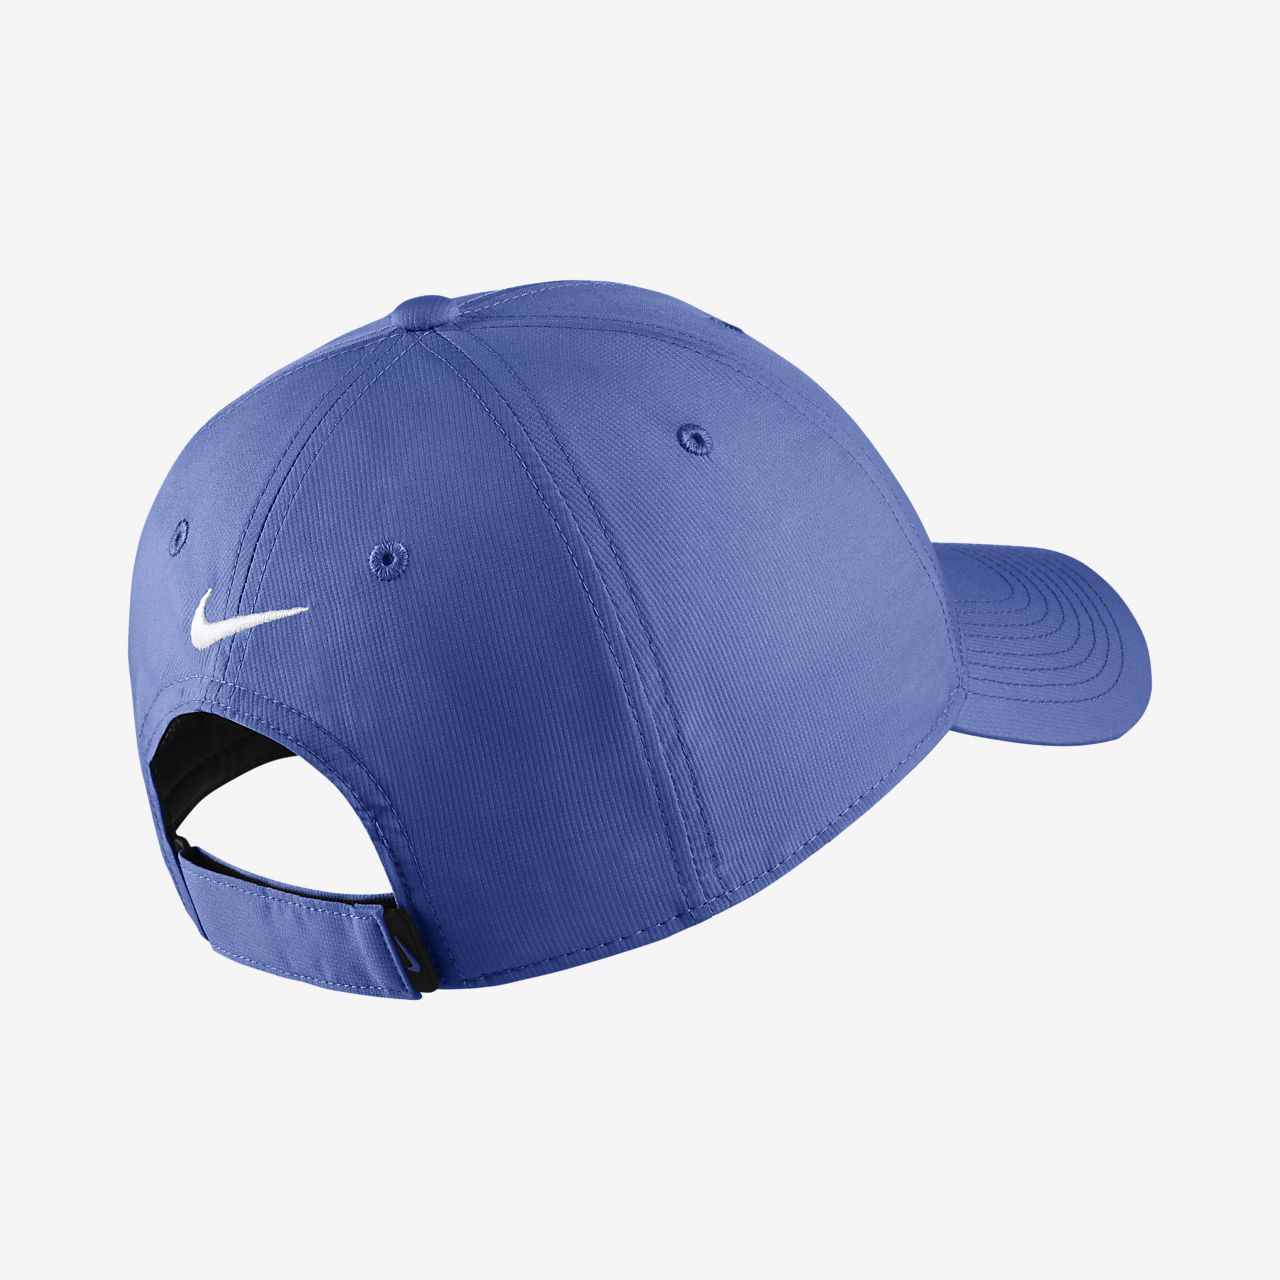 Auto Parts and Vehicles Mercedes-Benz Nike Running Blue Baseball Cap ...